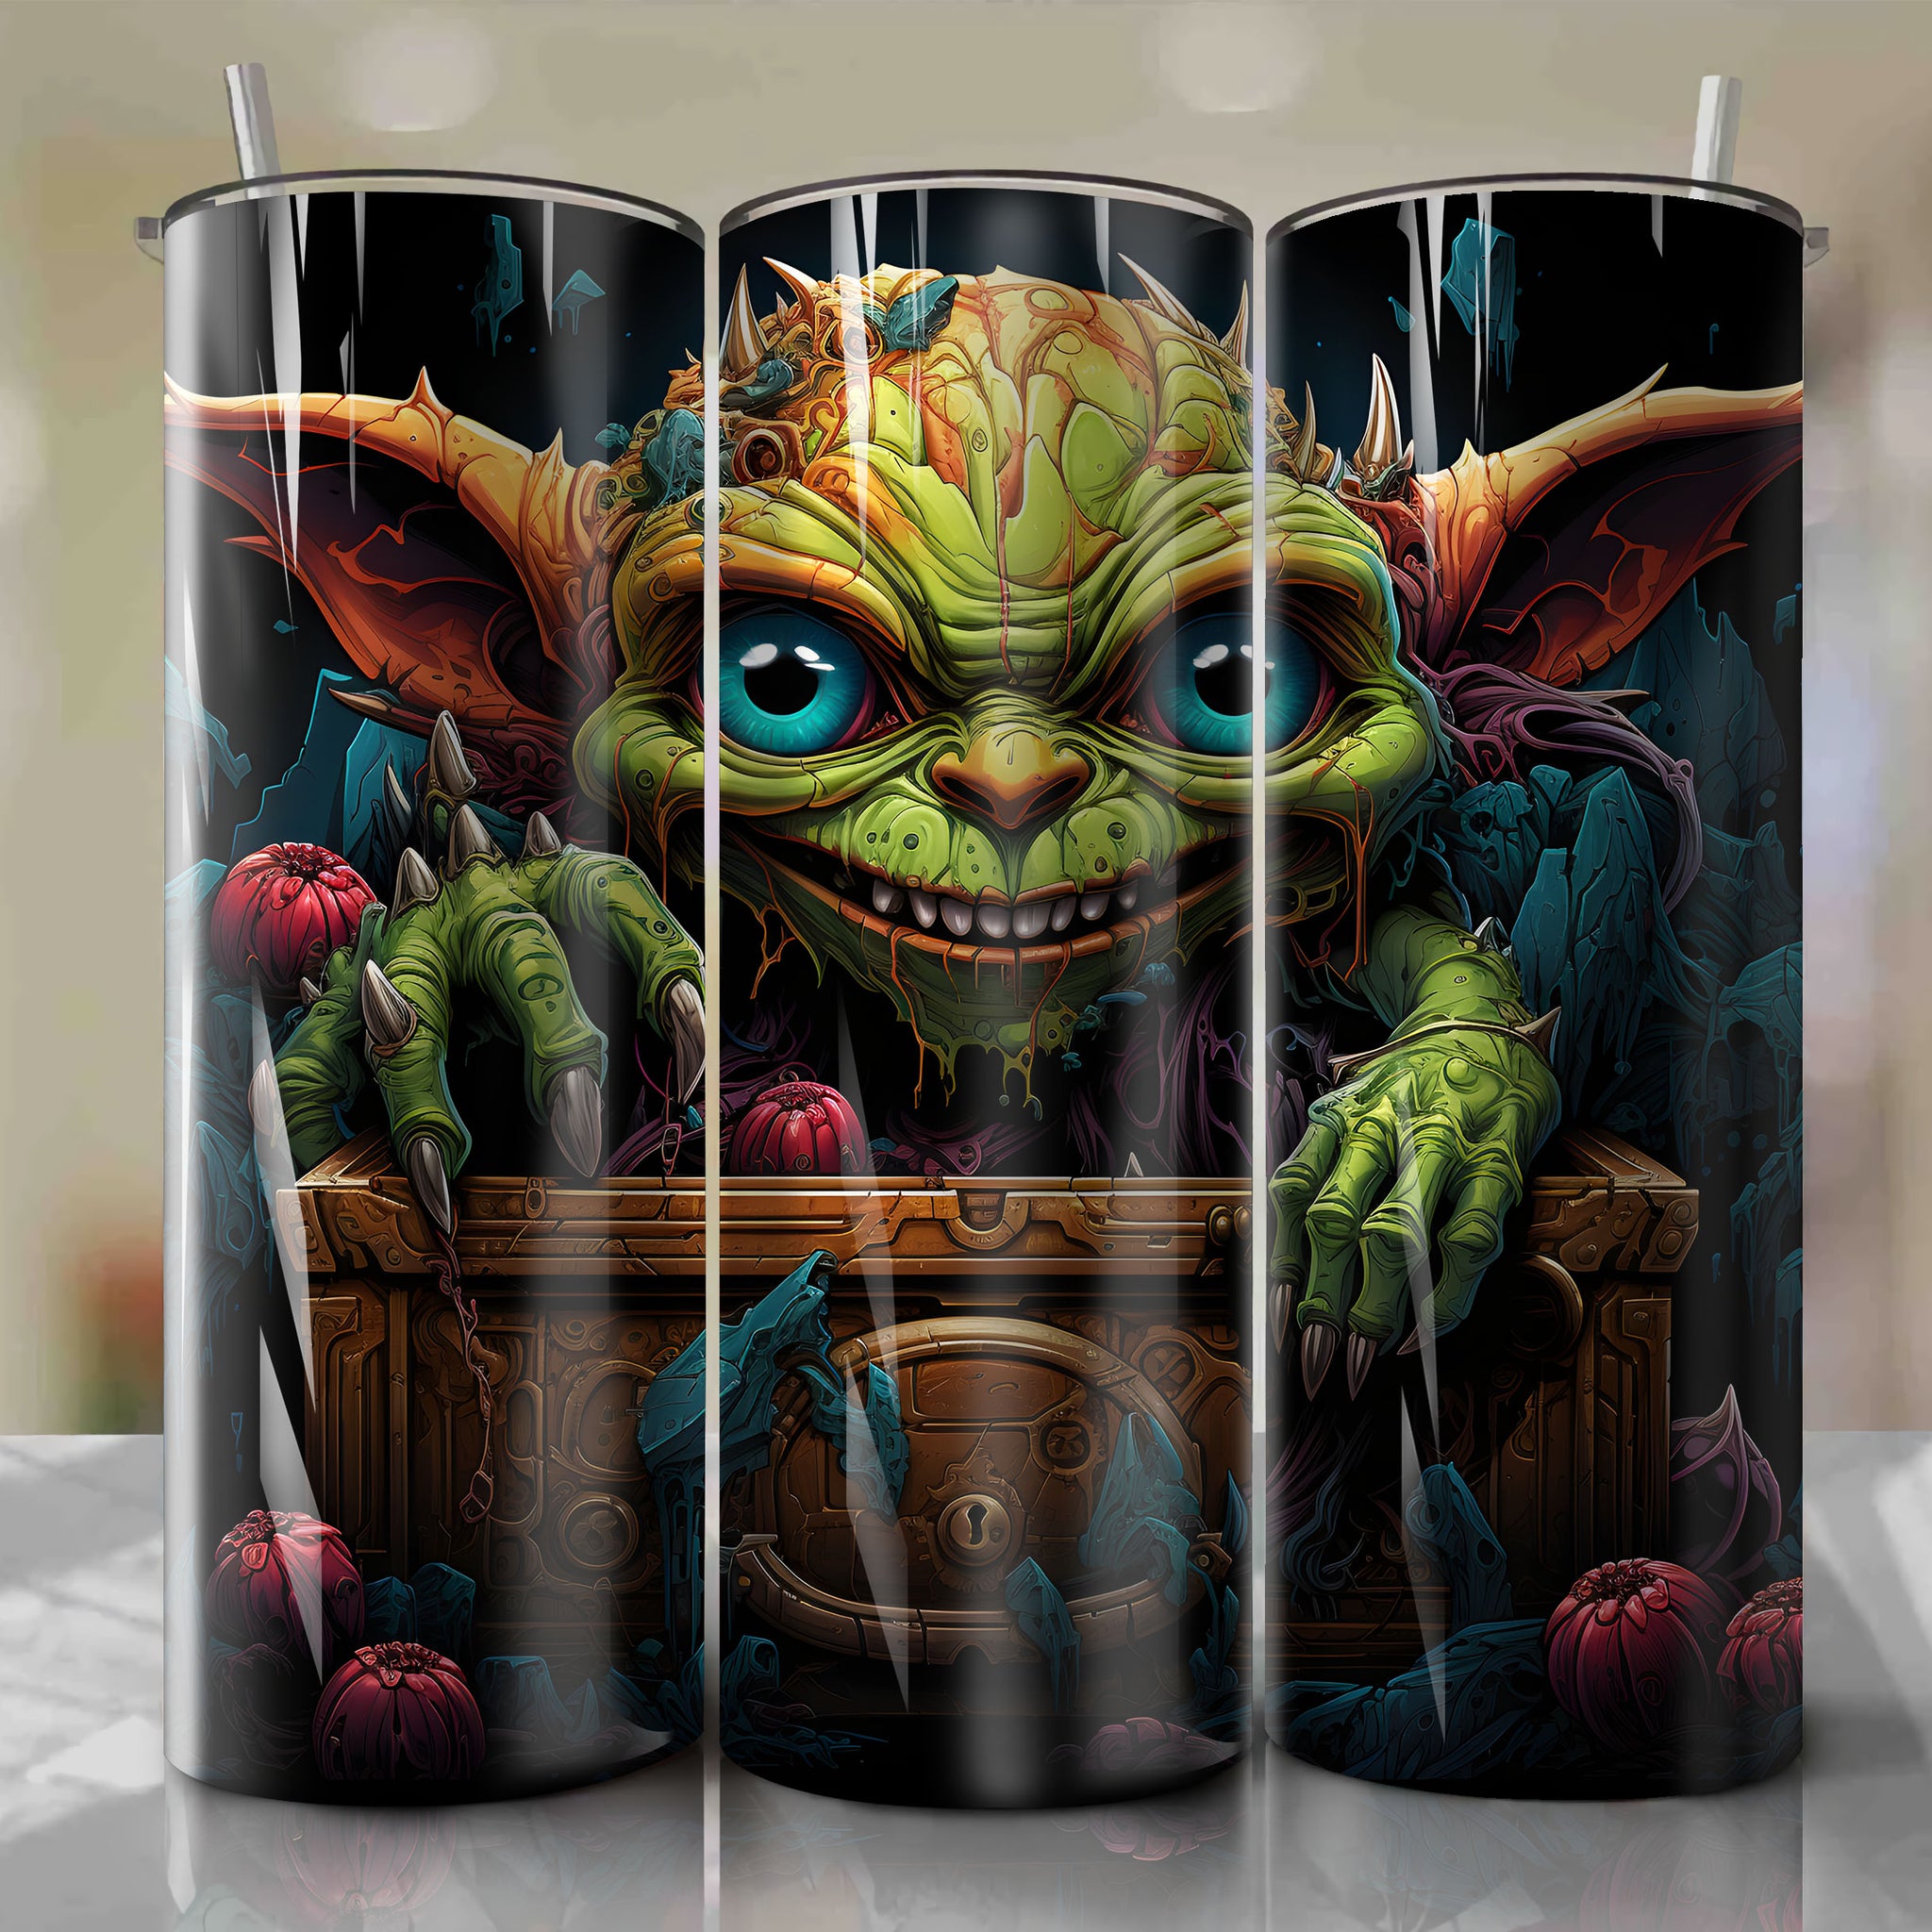 Vibrant 3D Goblin Peeking Out from Broken Treasure Chest - Tumbler Wrap for 20 oz Straight Tumblers